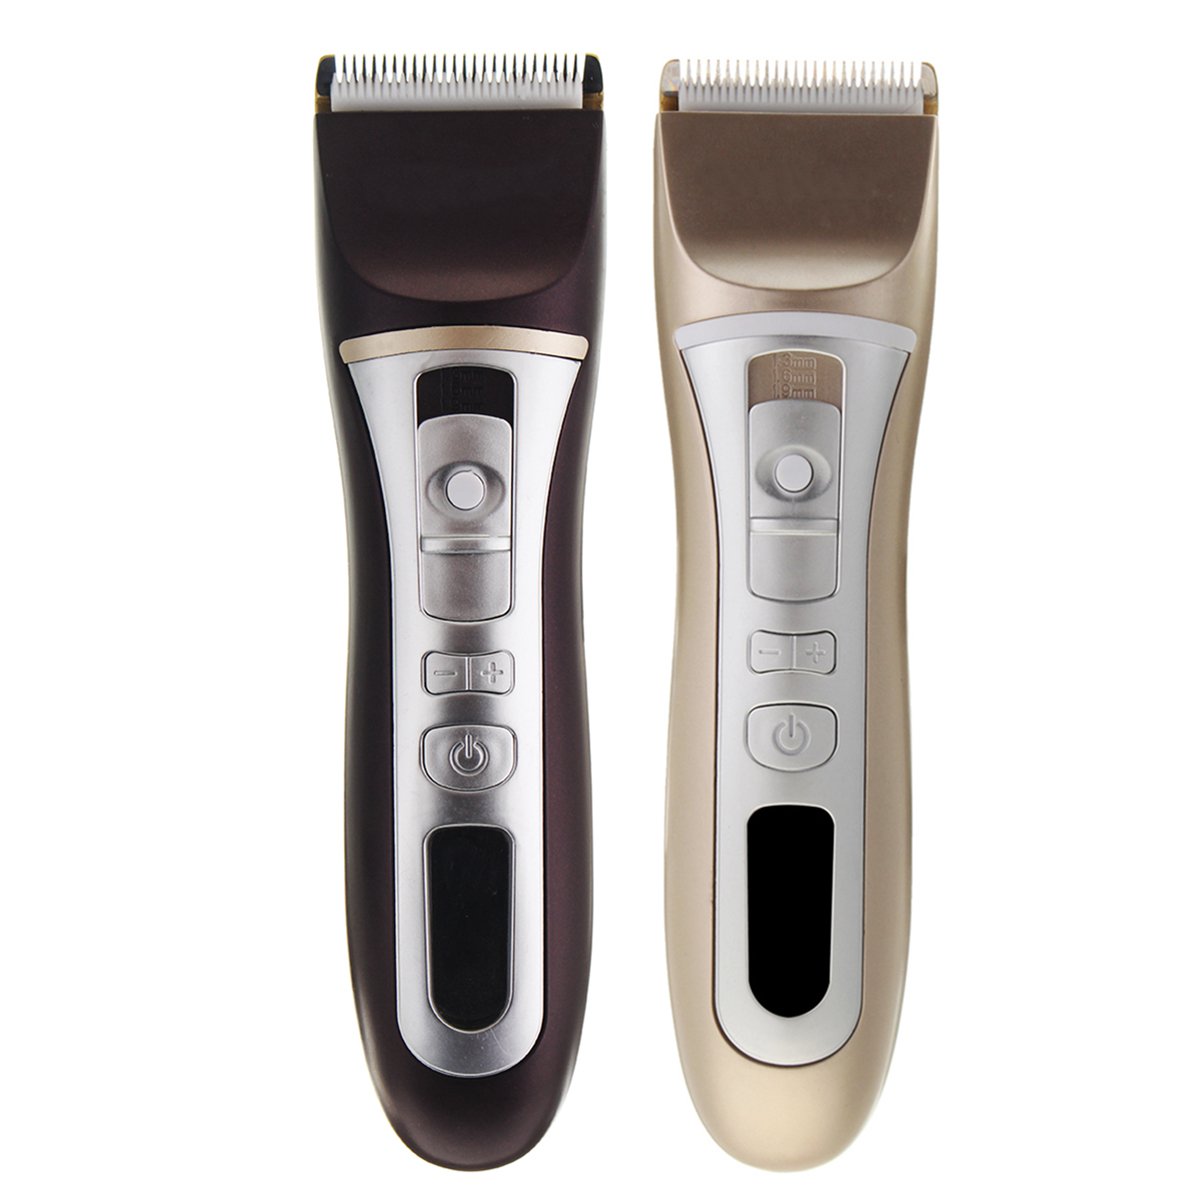 100V-240V-Electric-Hair-Clipper-Gold-Black-Charging-LCD-Display-Hair-Trimmer-With-Comb-1272013